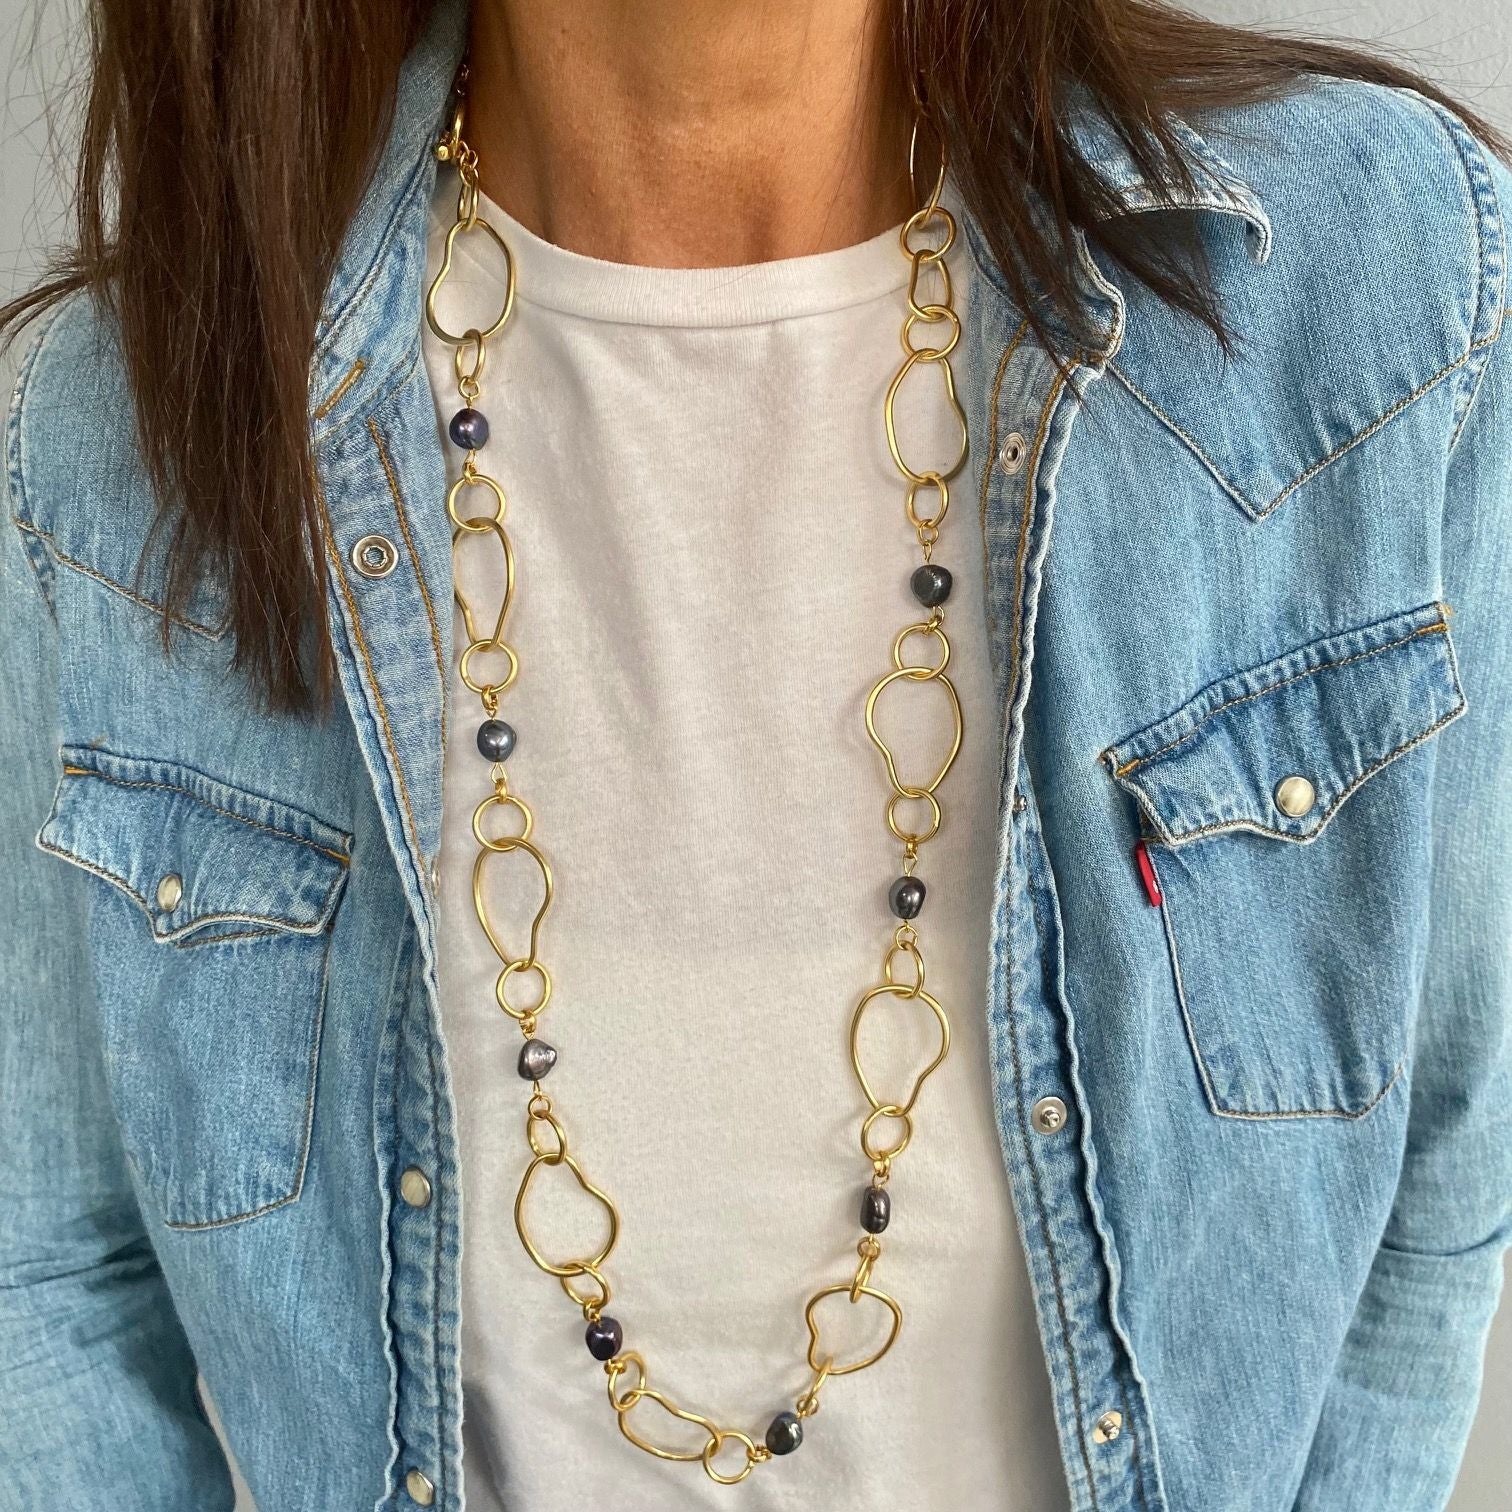 Organic link and peacock pearl station necklace - Karine Sultan